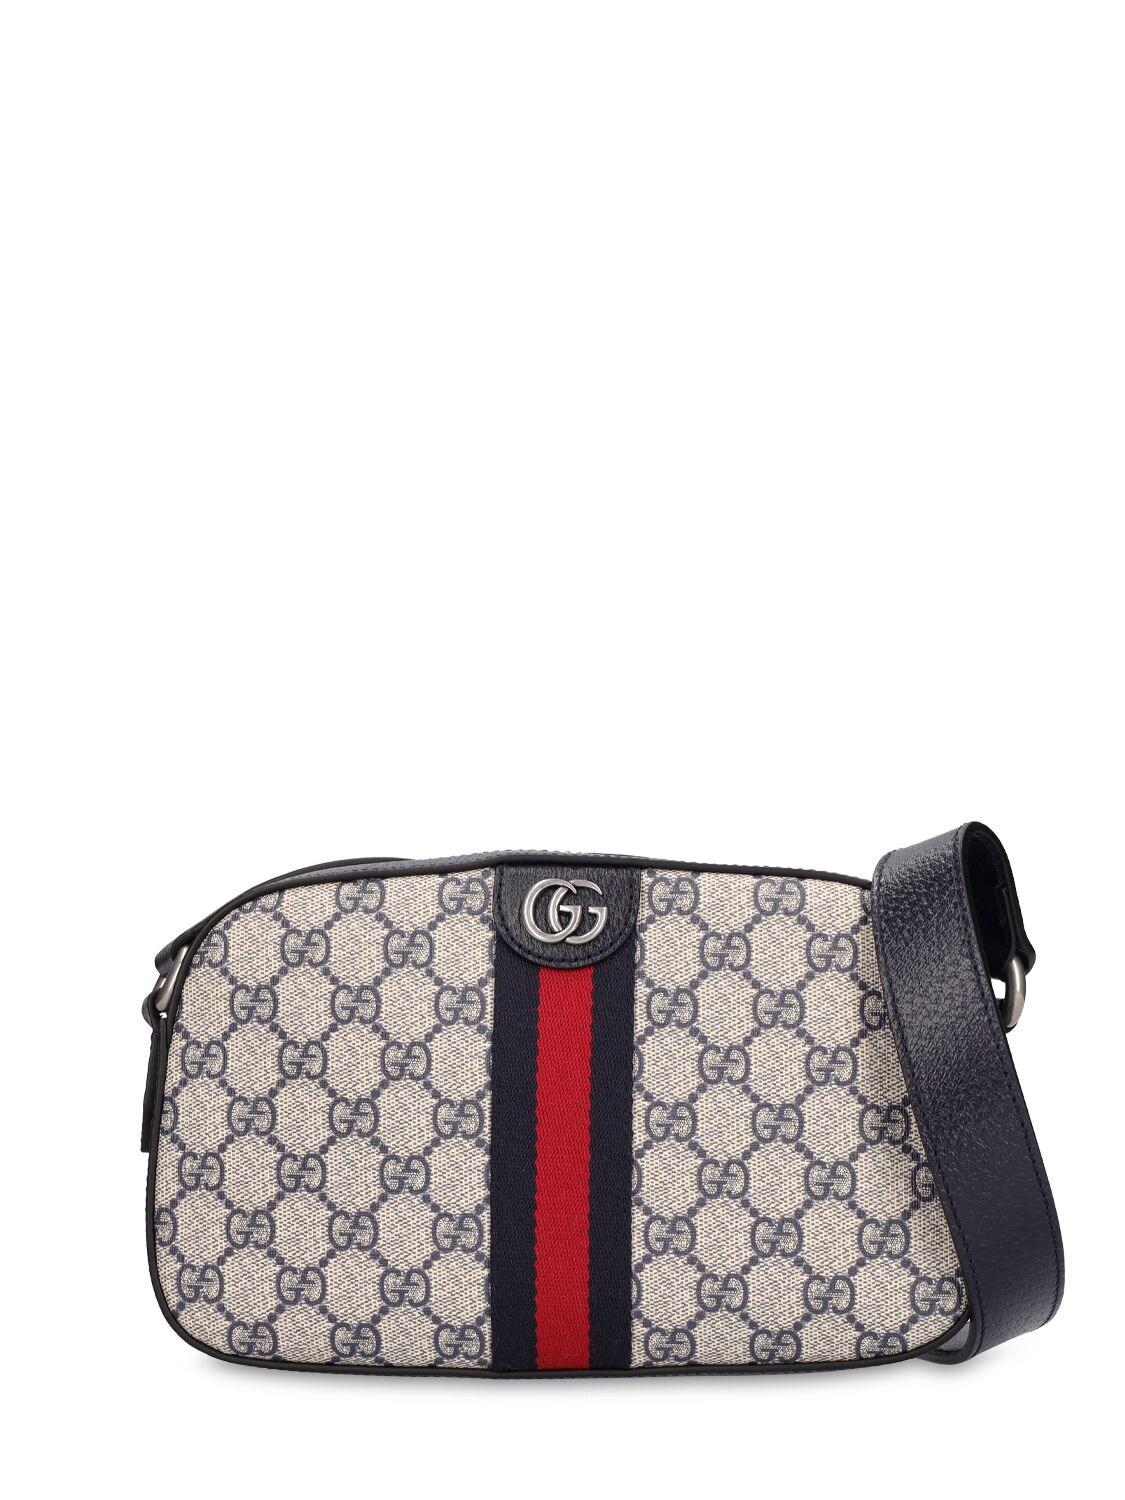 Ophidia GG small messenger bag in beige and blue GG Supreme